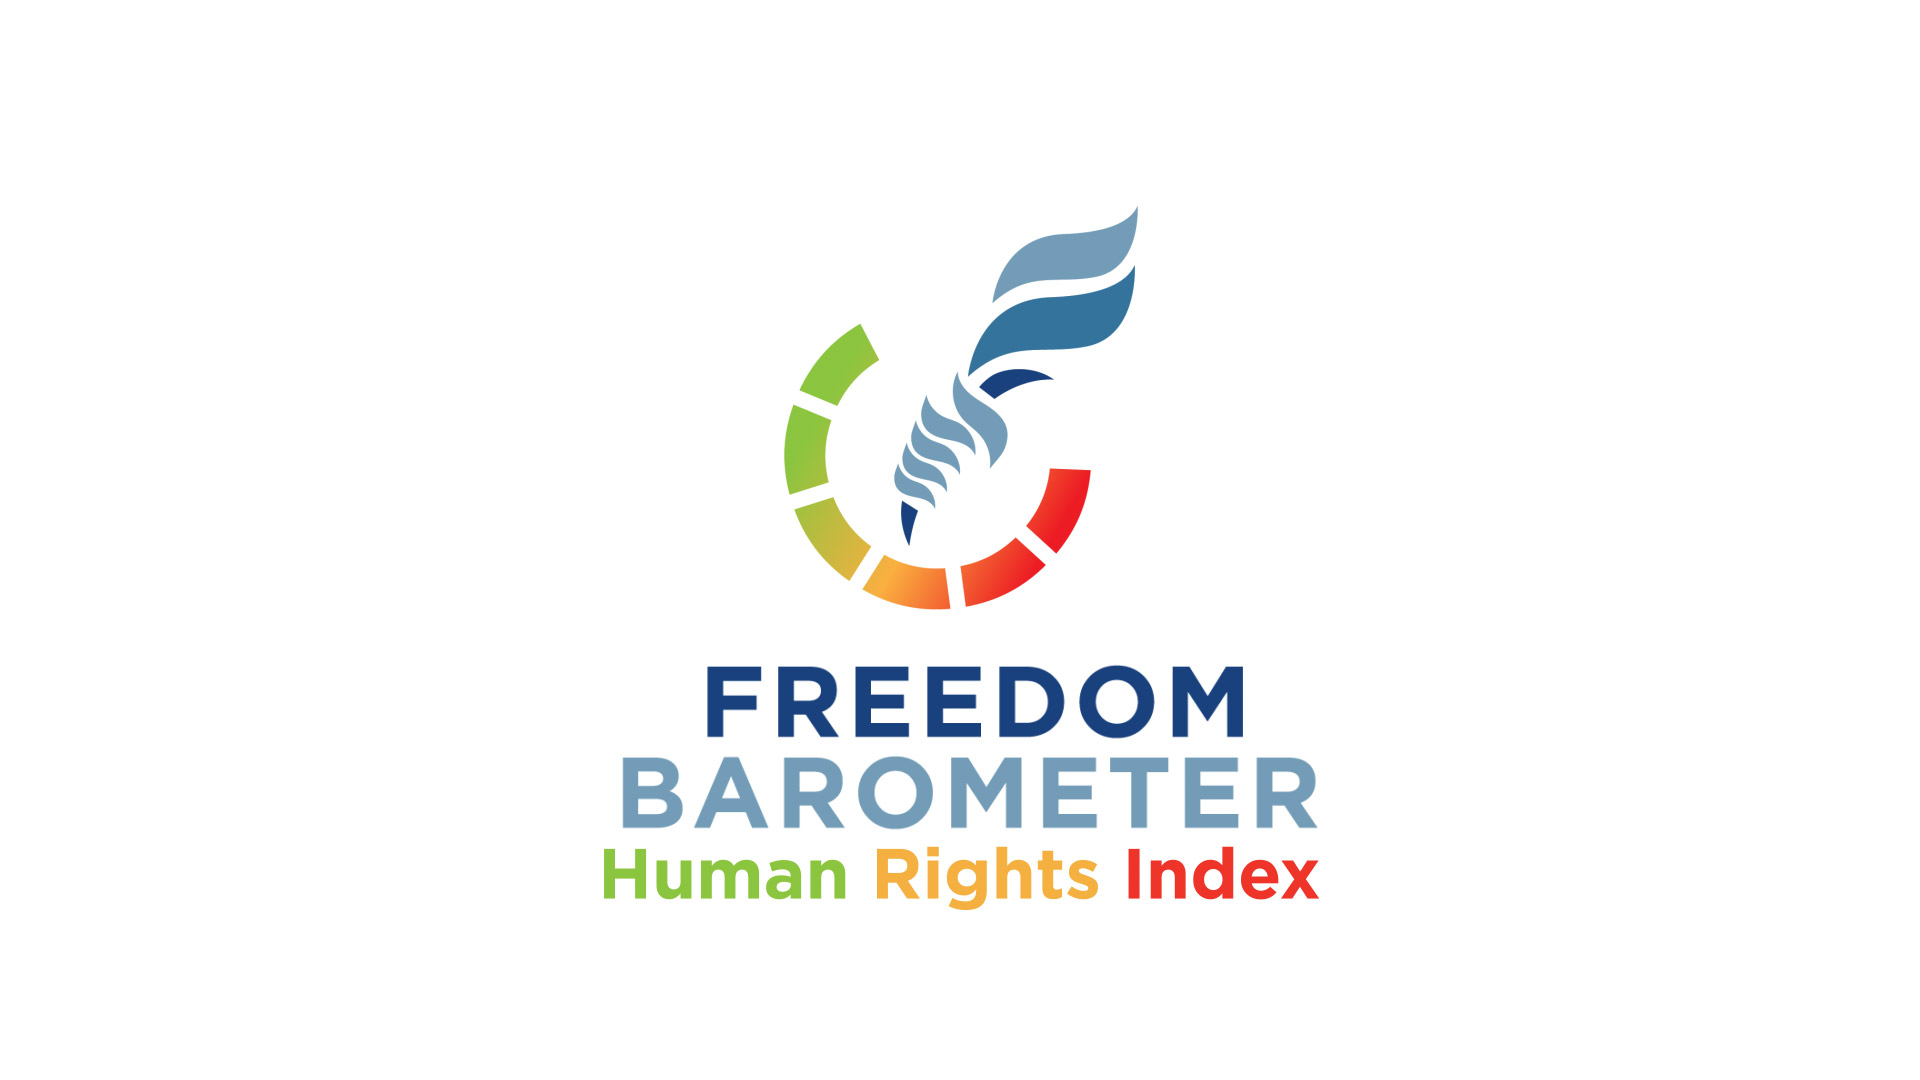 Finding Freedom: Human rights and where to find them